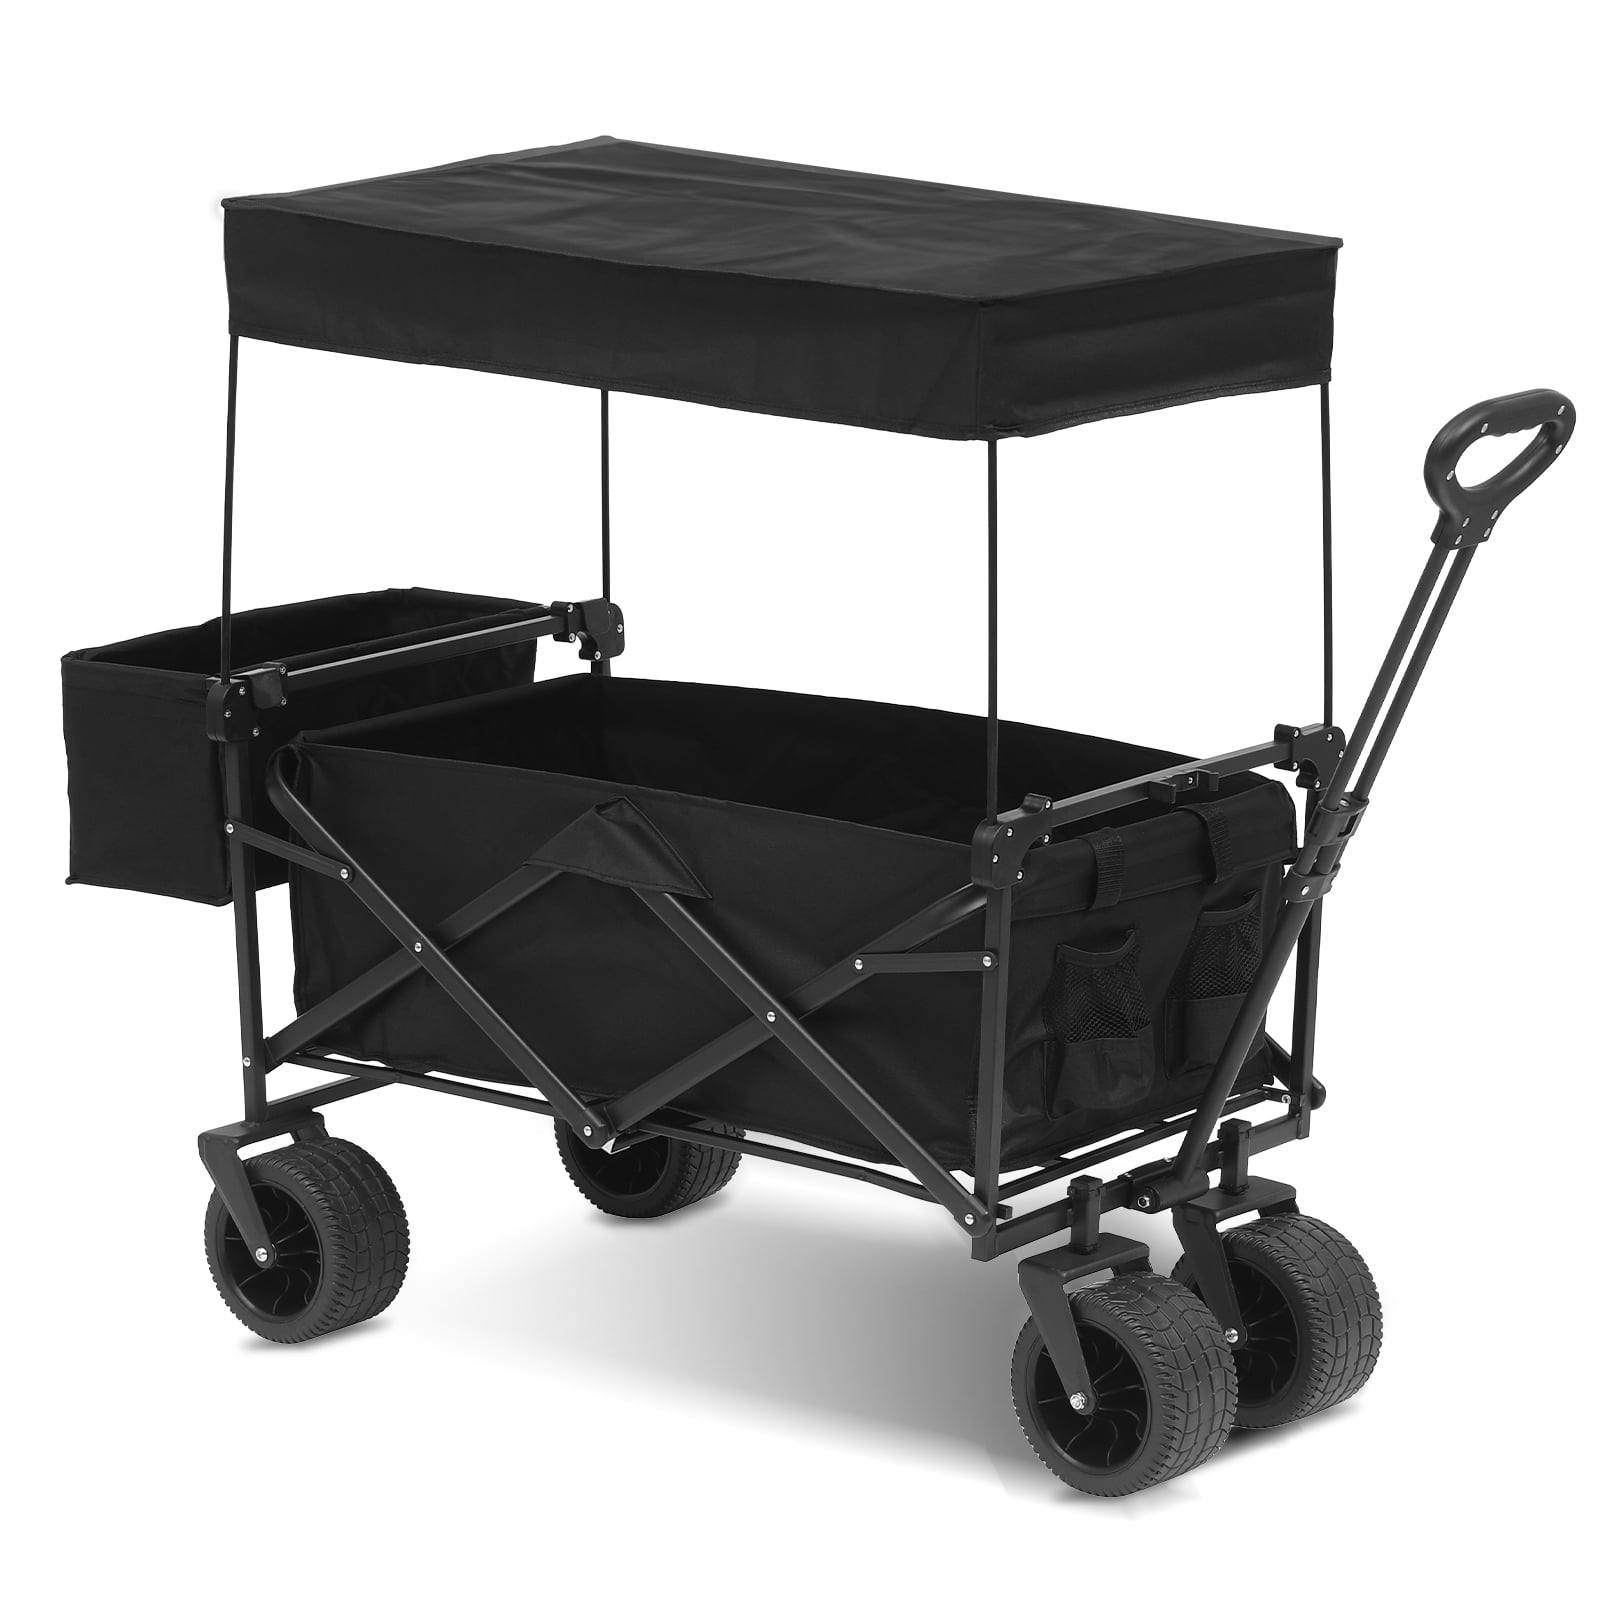 VIVOHOME 176 lbs. Capacity Collapsible Garden Cart in Black with 2